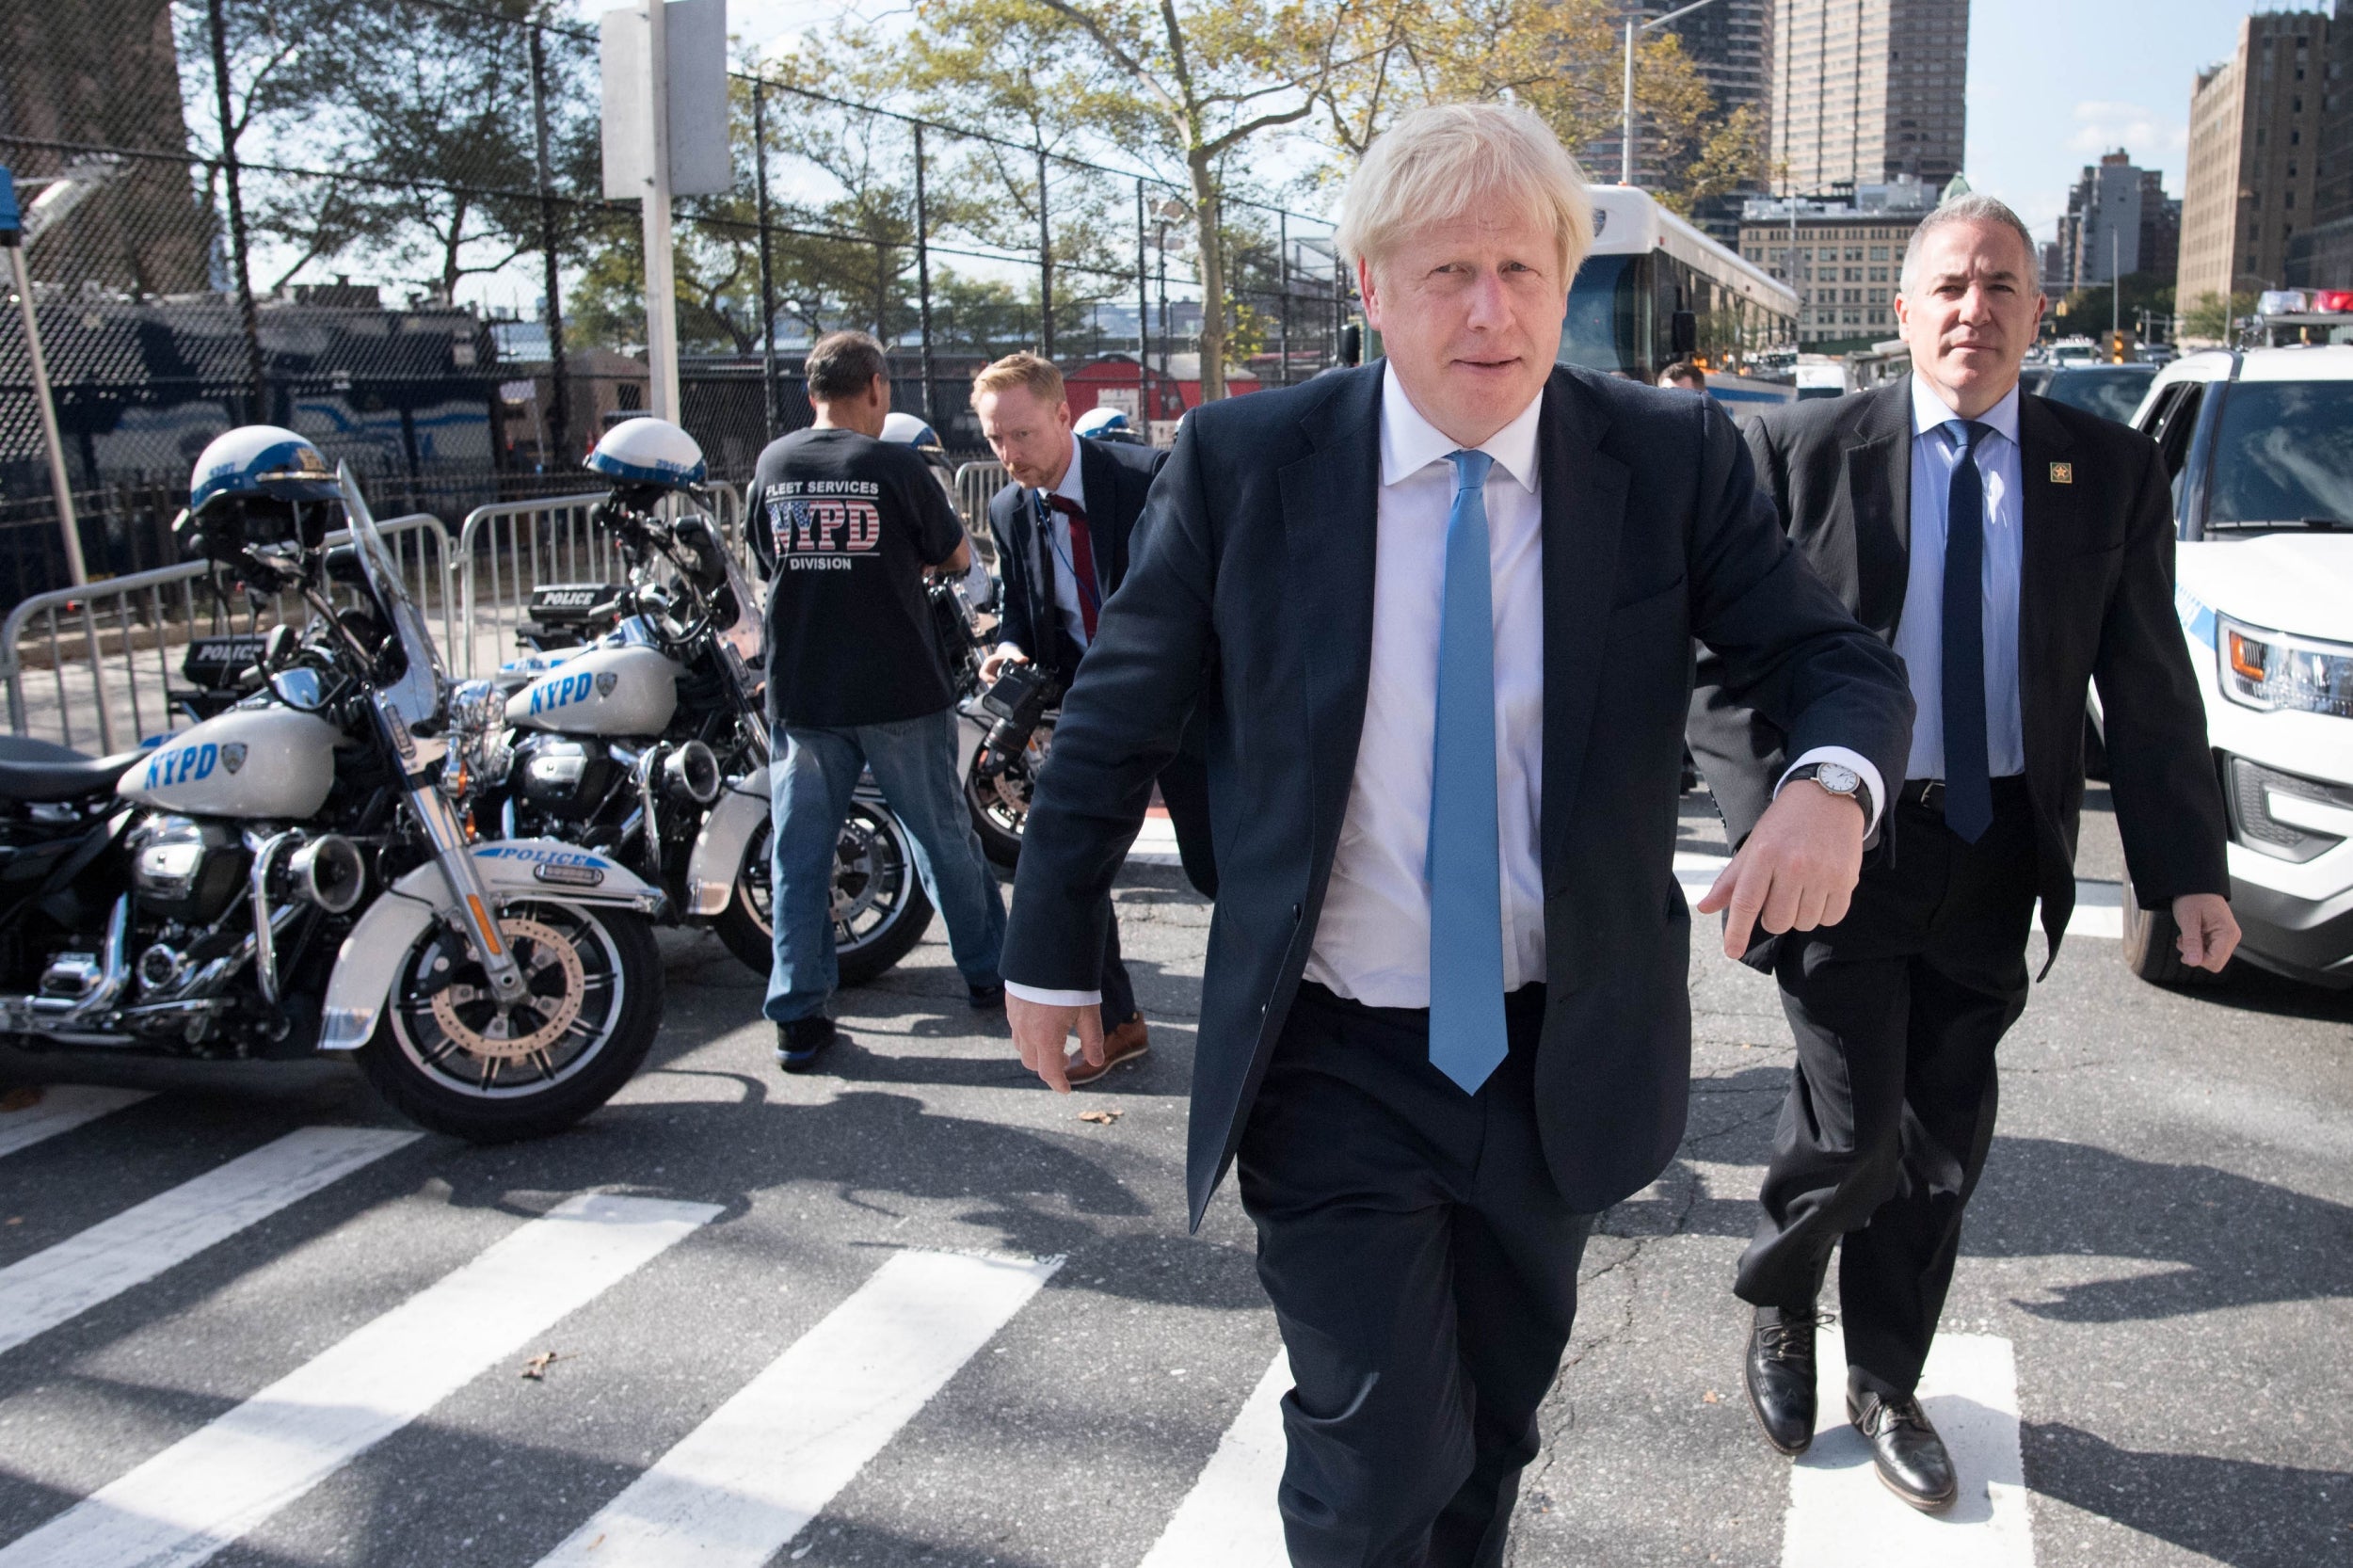 Boris Johnson will not arrive back in the UK in time for the reopening of parliament, at 11.30am